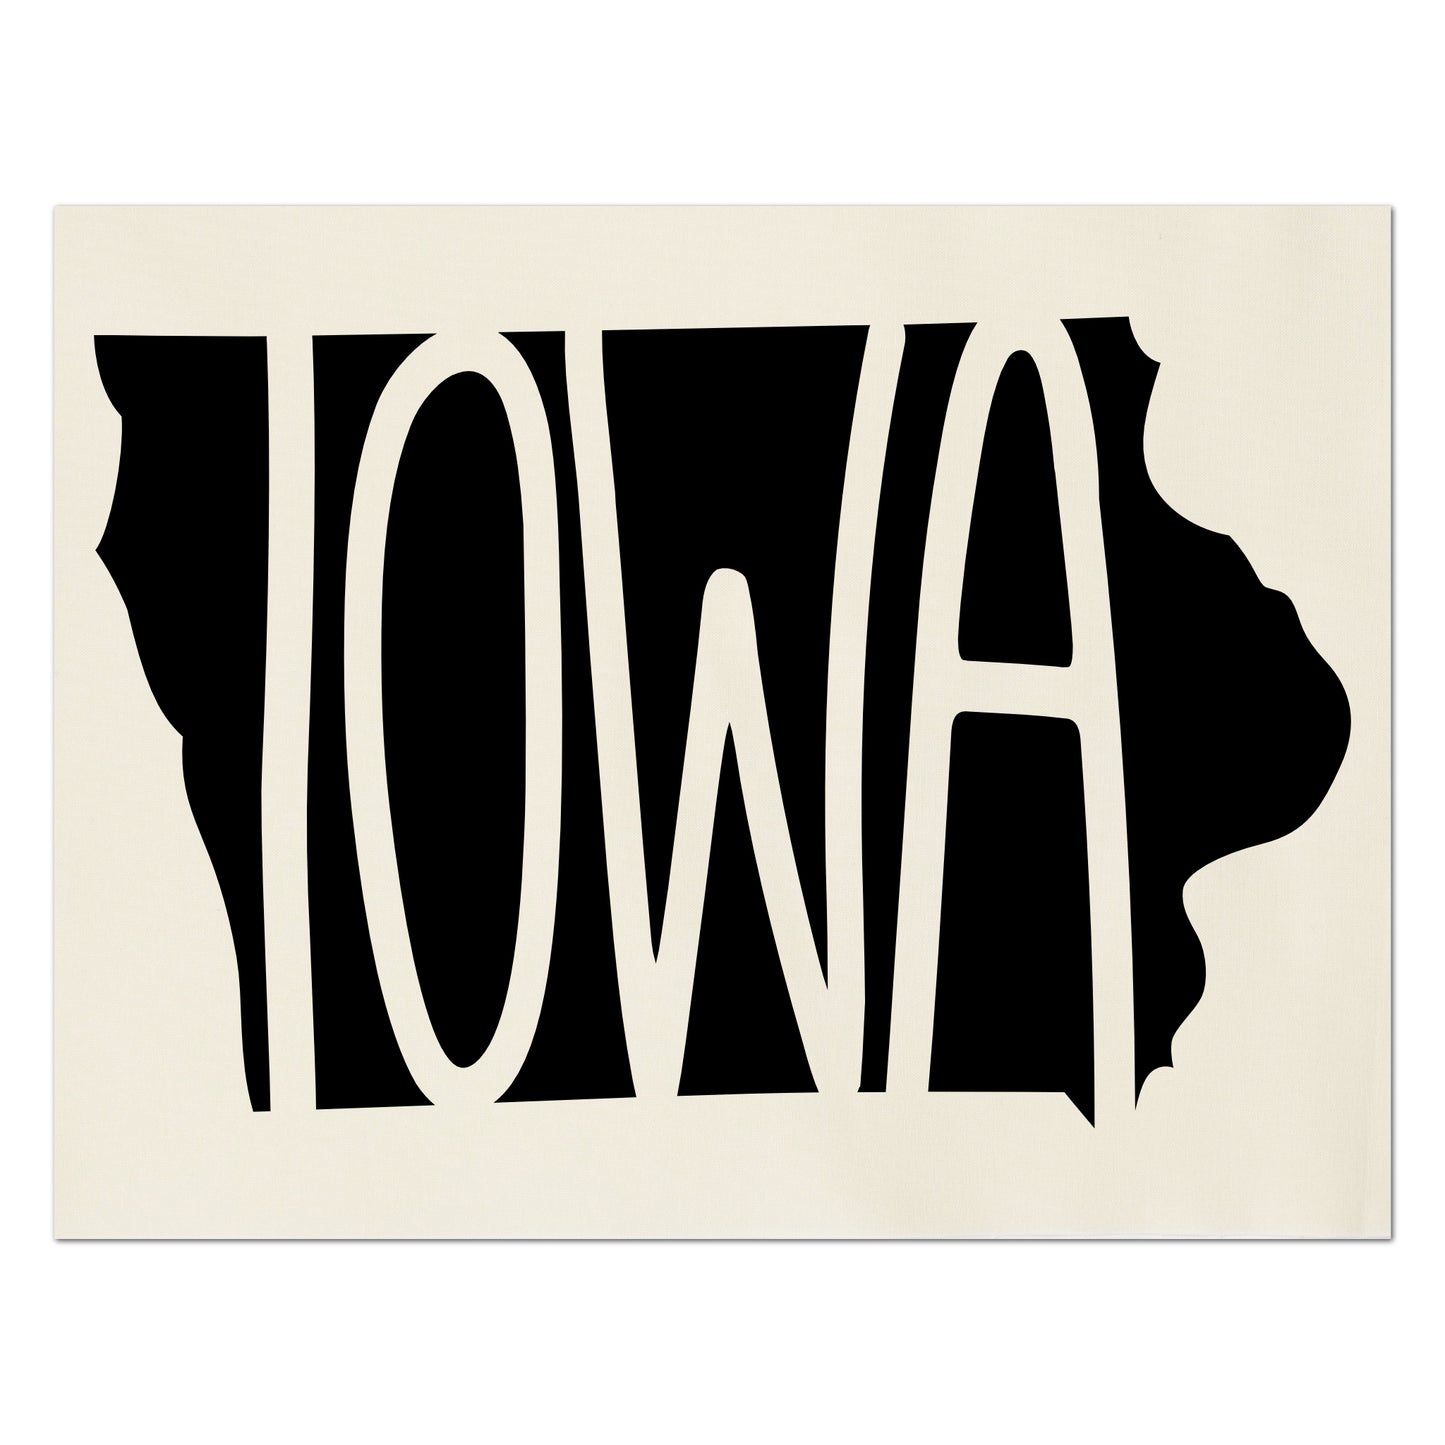 Iowa - Fabric Panel Print, Large | Small Cotton Quilt Block, Craft, State Silhouette